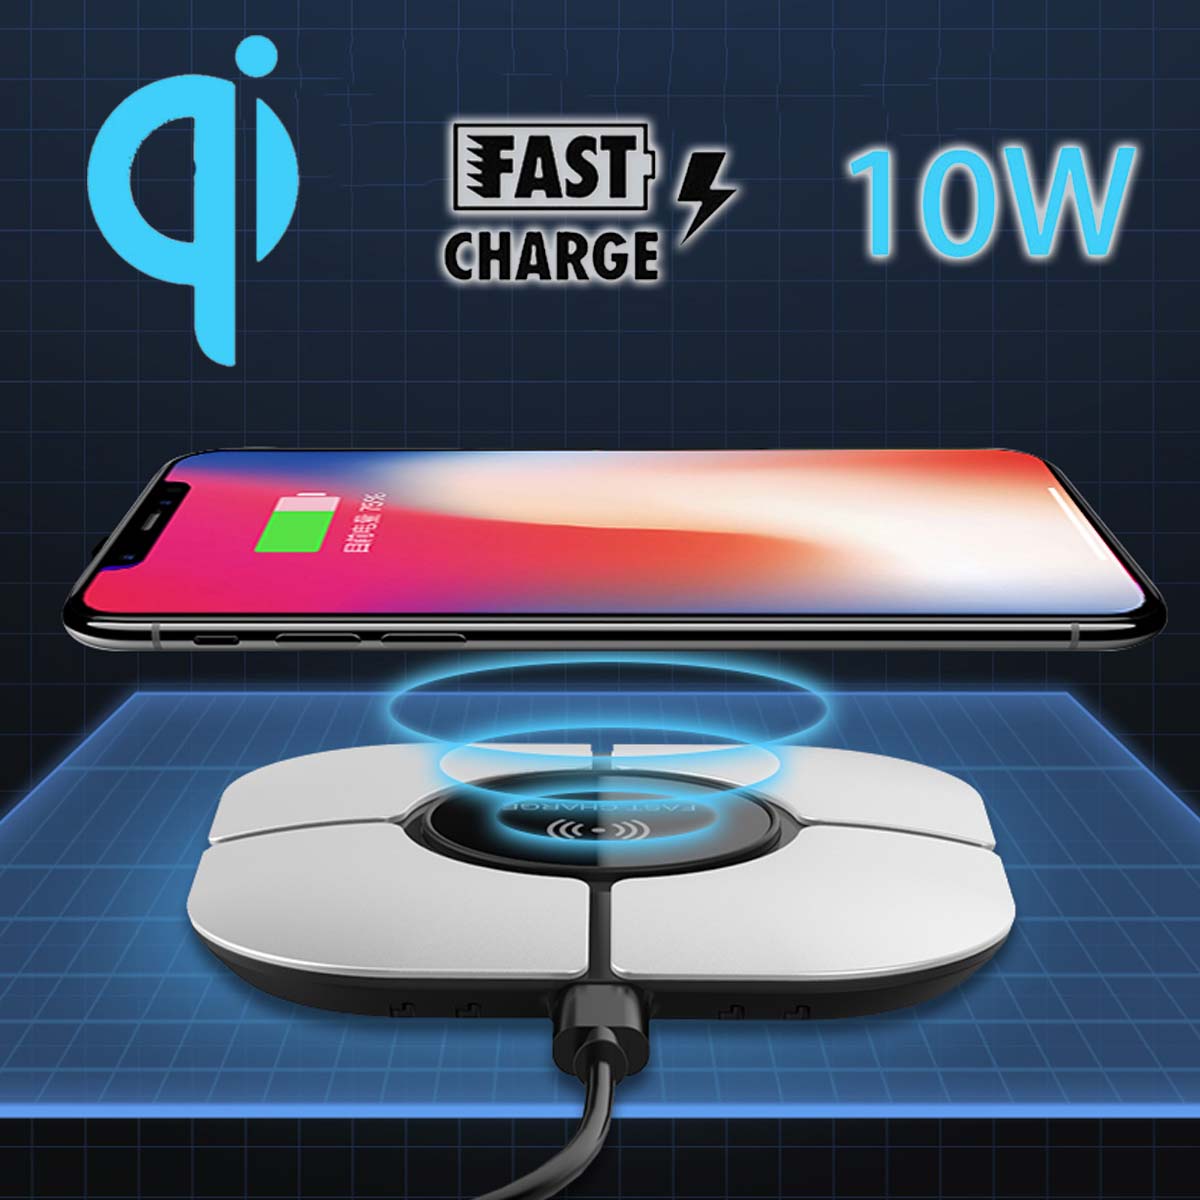 Bakeey-10W-Fast-Charging-LED-Light-Indicator-Qi-Wireless-Charger-Pad-for-iPhone-X-S8-S9-Plus-1314490-1